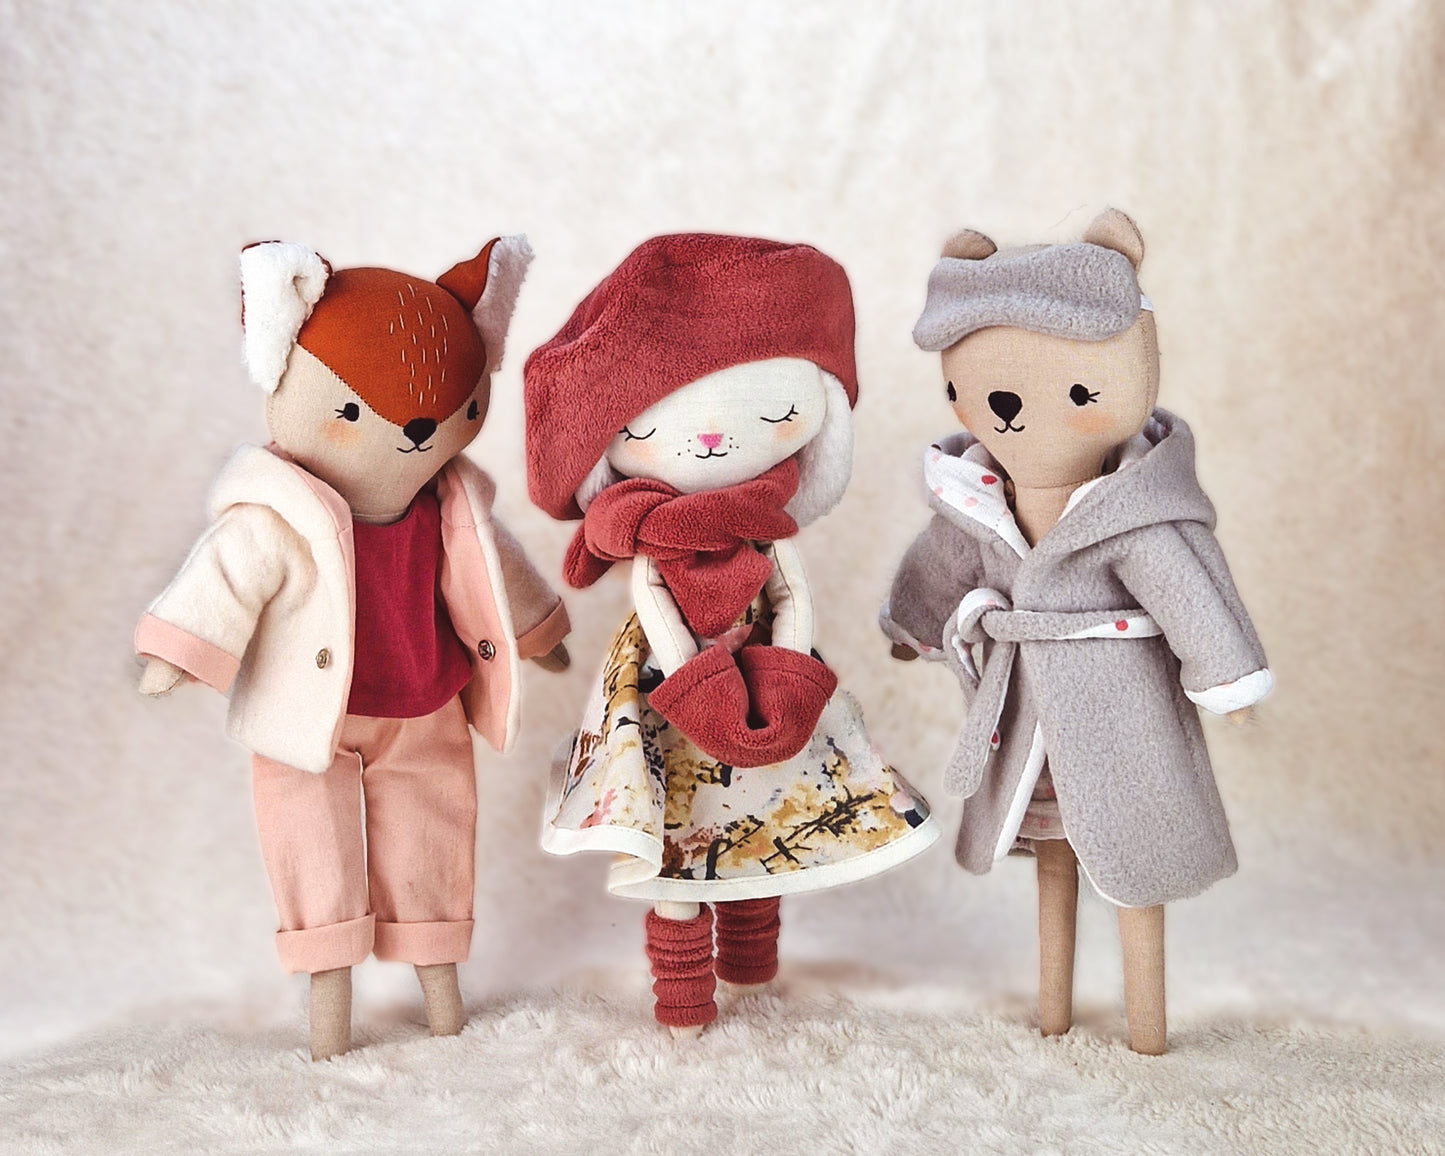 Set of clothes for Forest doll body - PDF sewing pattern and tutorial